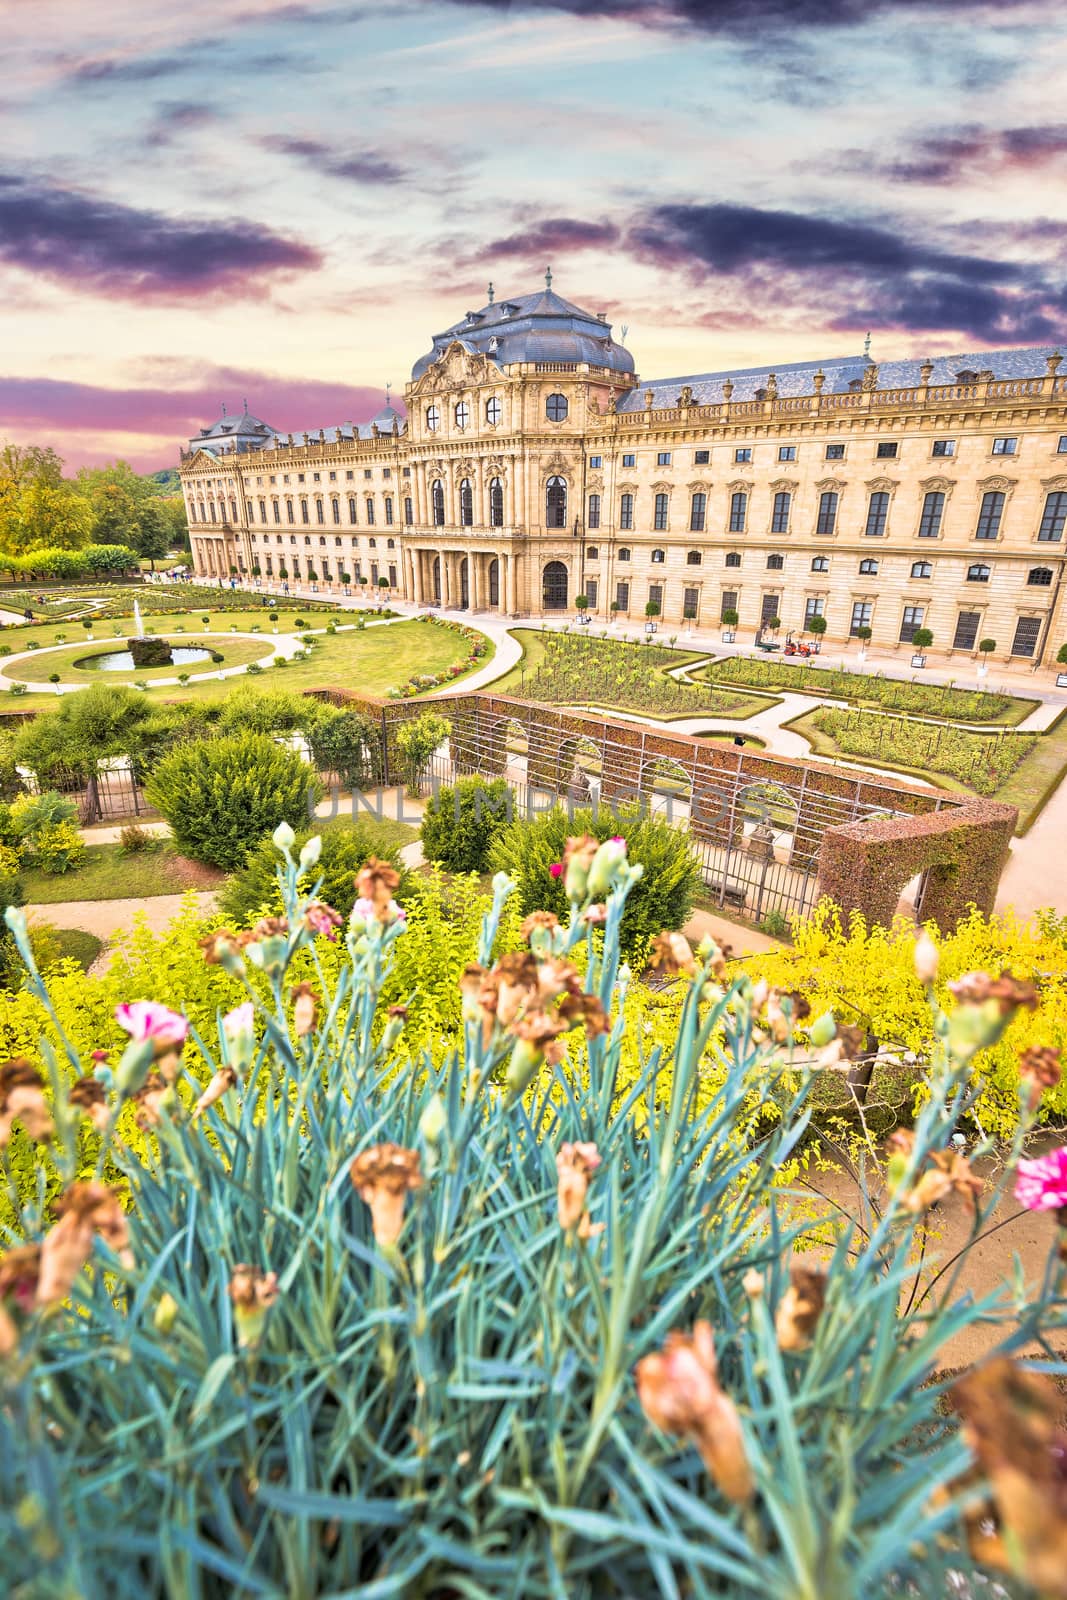 Wurzburg Residenz and colorful gardens view by xbrchx